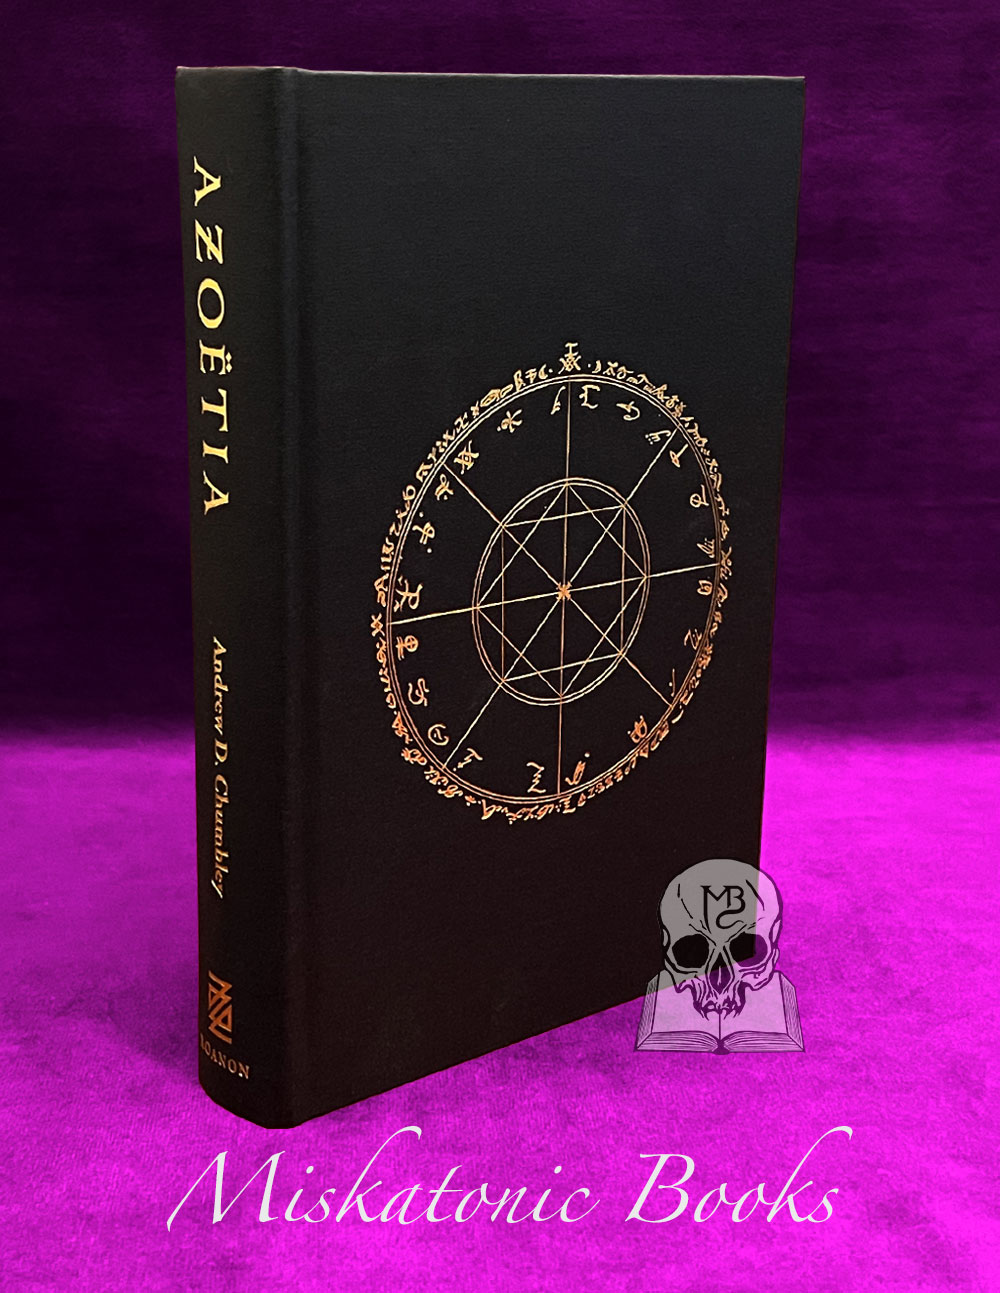 AZOETIA: A Grimoire of the Sabbatic Craft by Andrew D. Chumbley 3rd edition - Limited Edition Hardcover (Missing Dust Jacket)